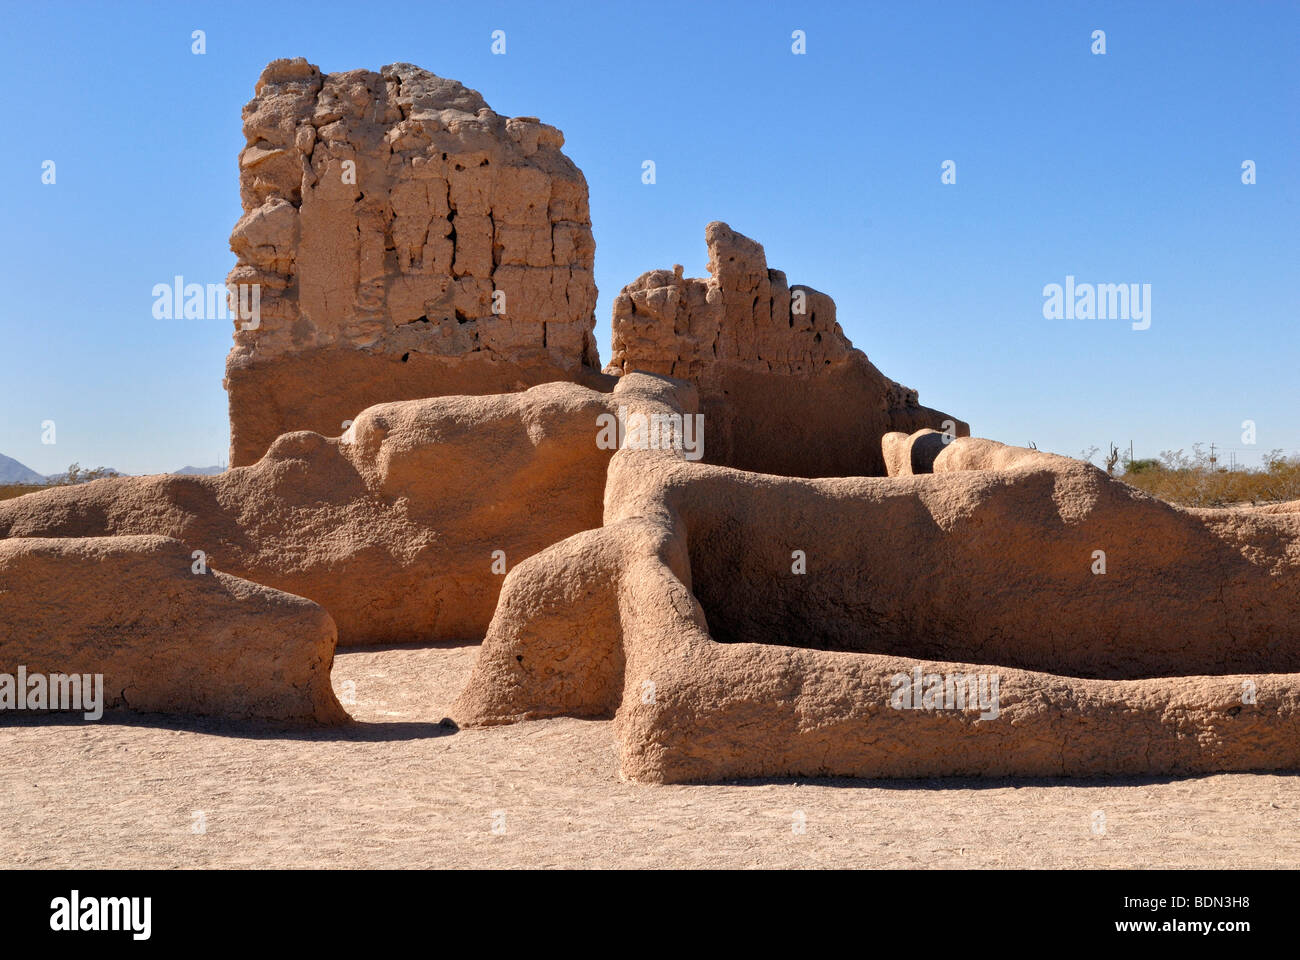 Remains of historic buildings of the Hohokam Indians, made of wattle and mortar, from around 1300 AD, Casa Grande Ruins Nationa Stock Photo